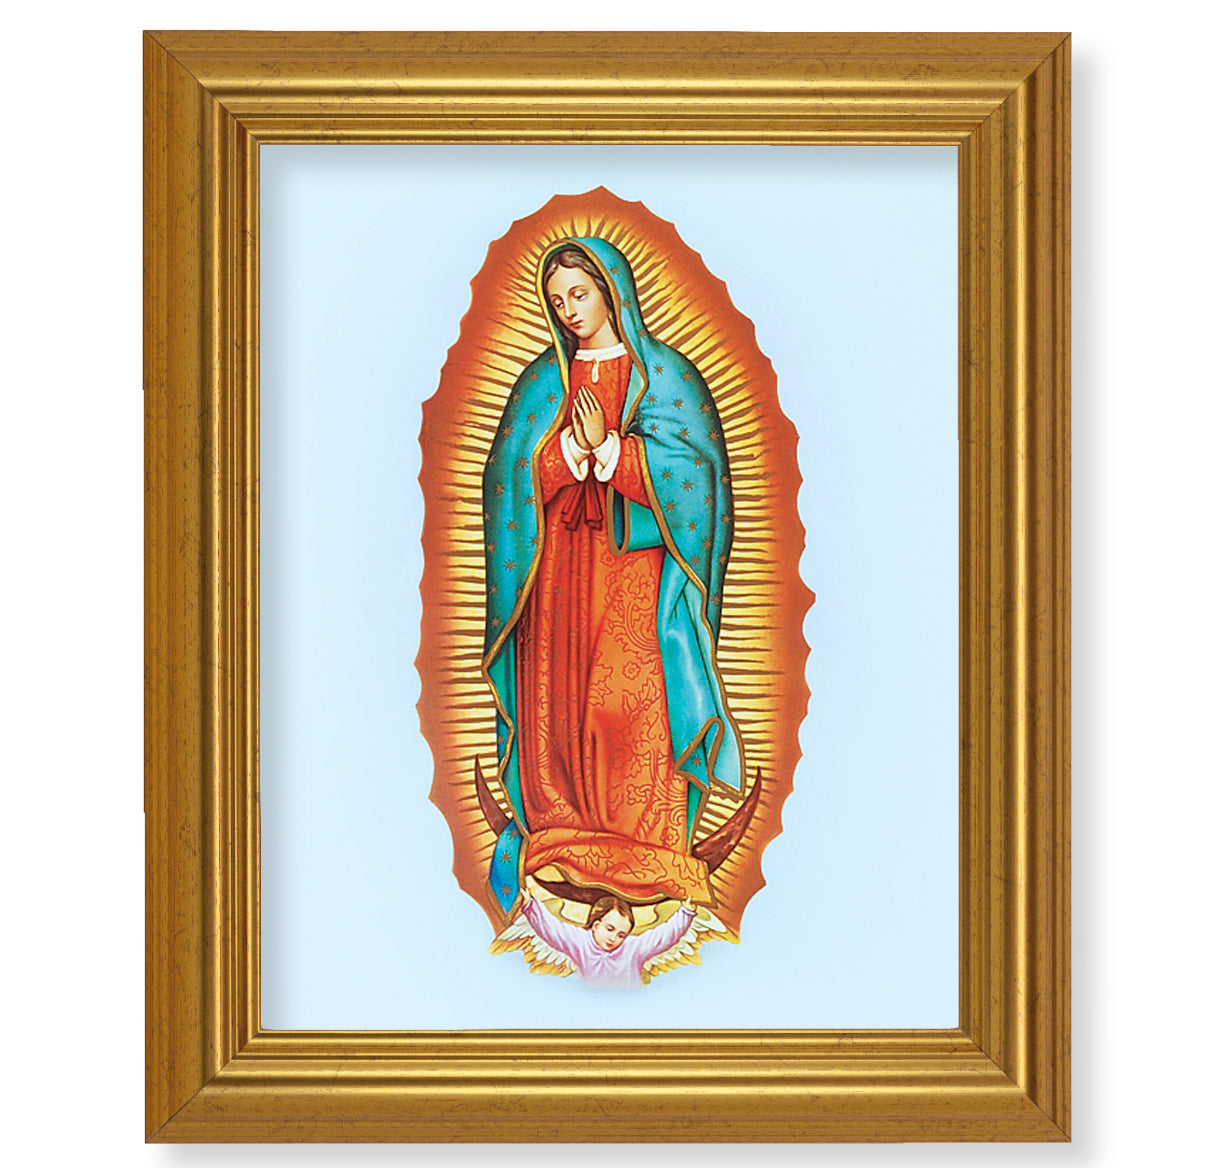 Our Lady of Guadalupe Picture Framed Wall Art Decor, Large, Antique Gold-Leaf Classic Frame